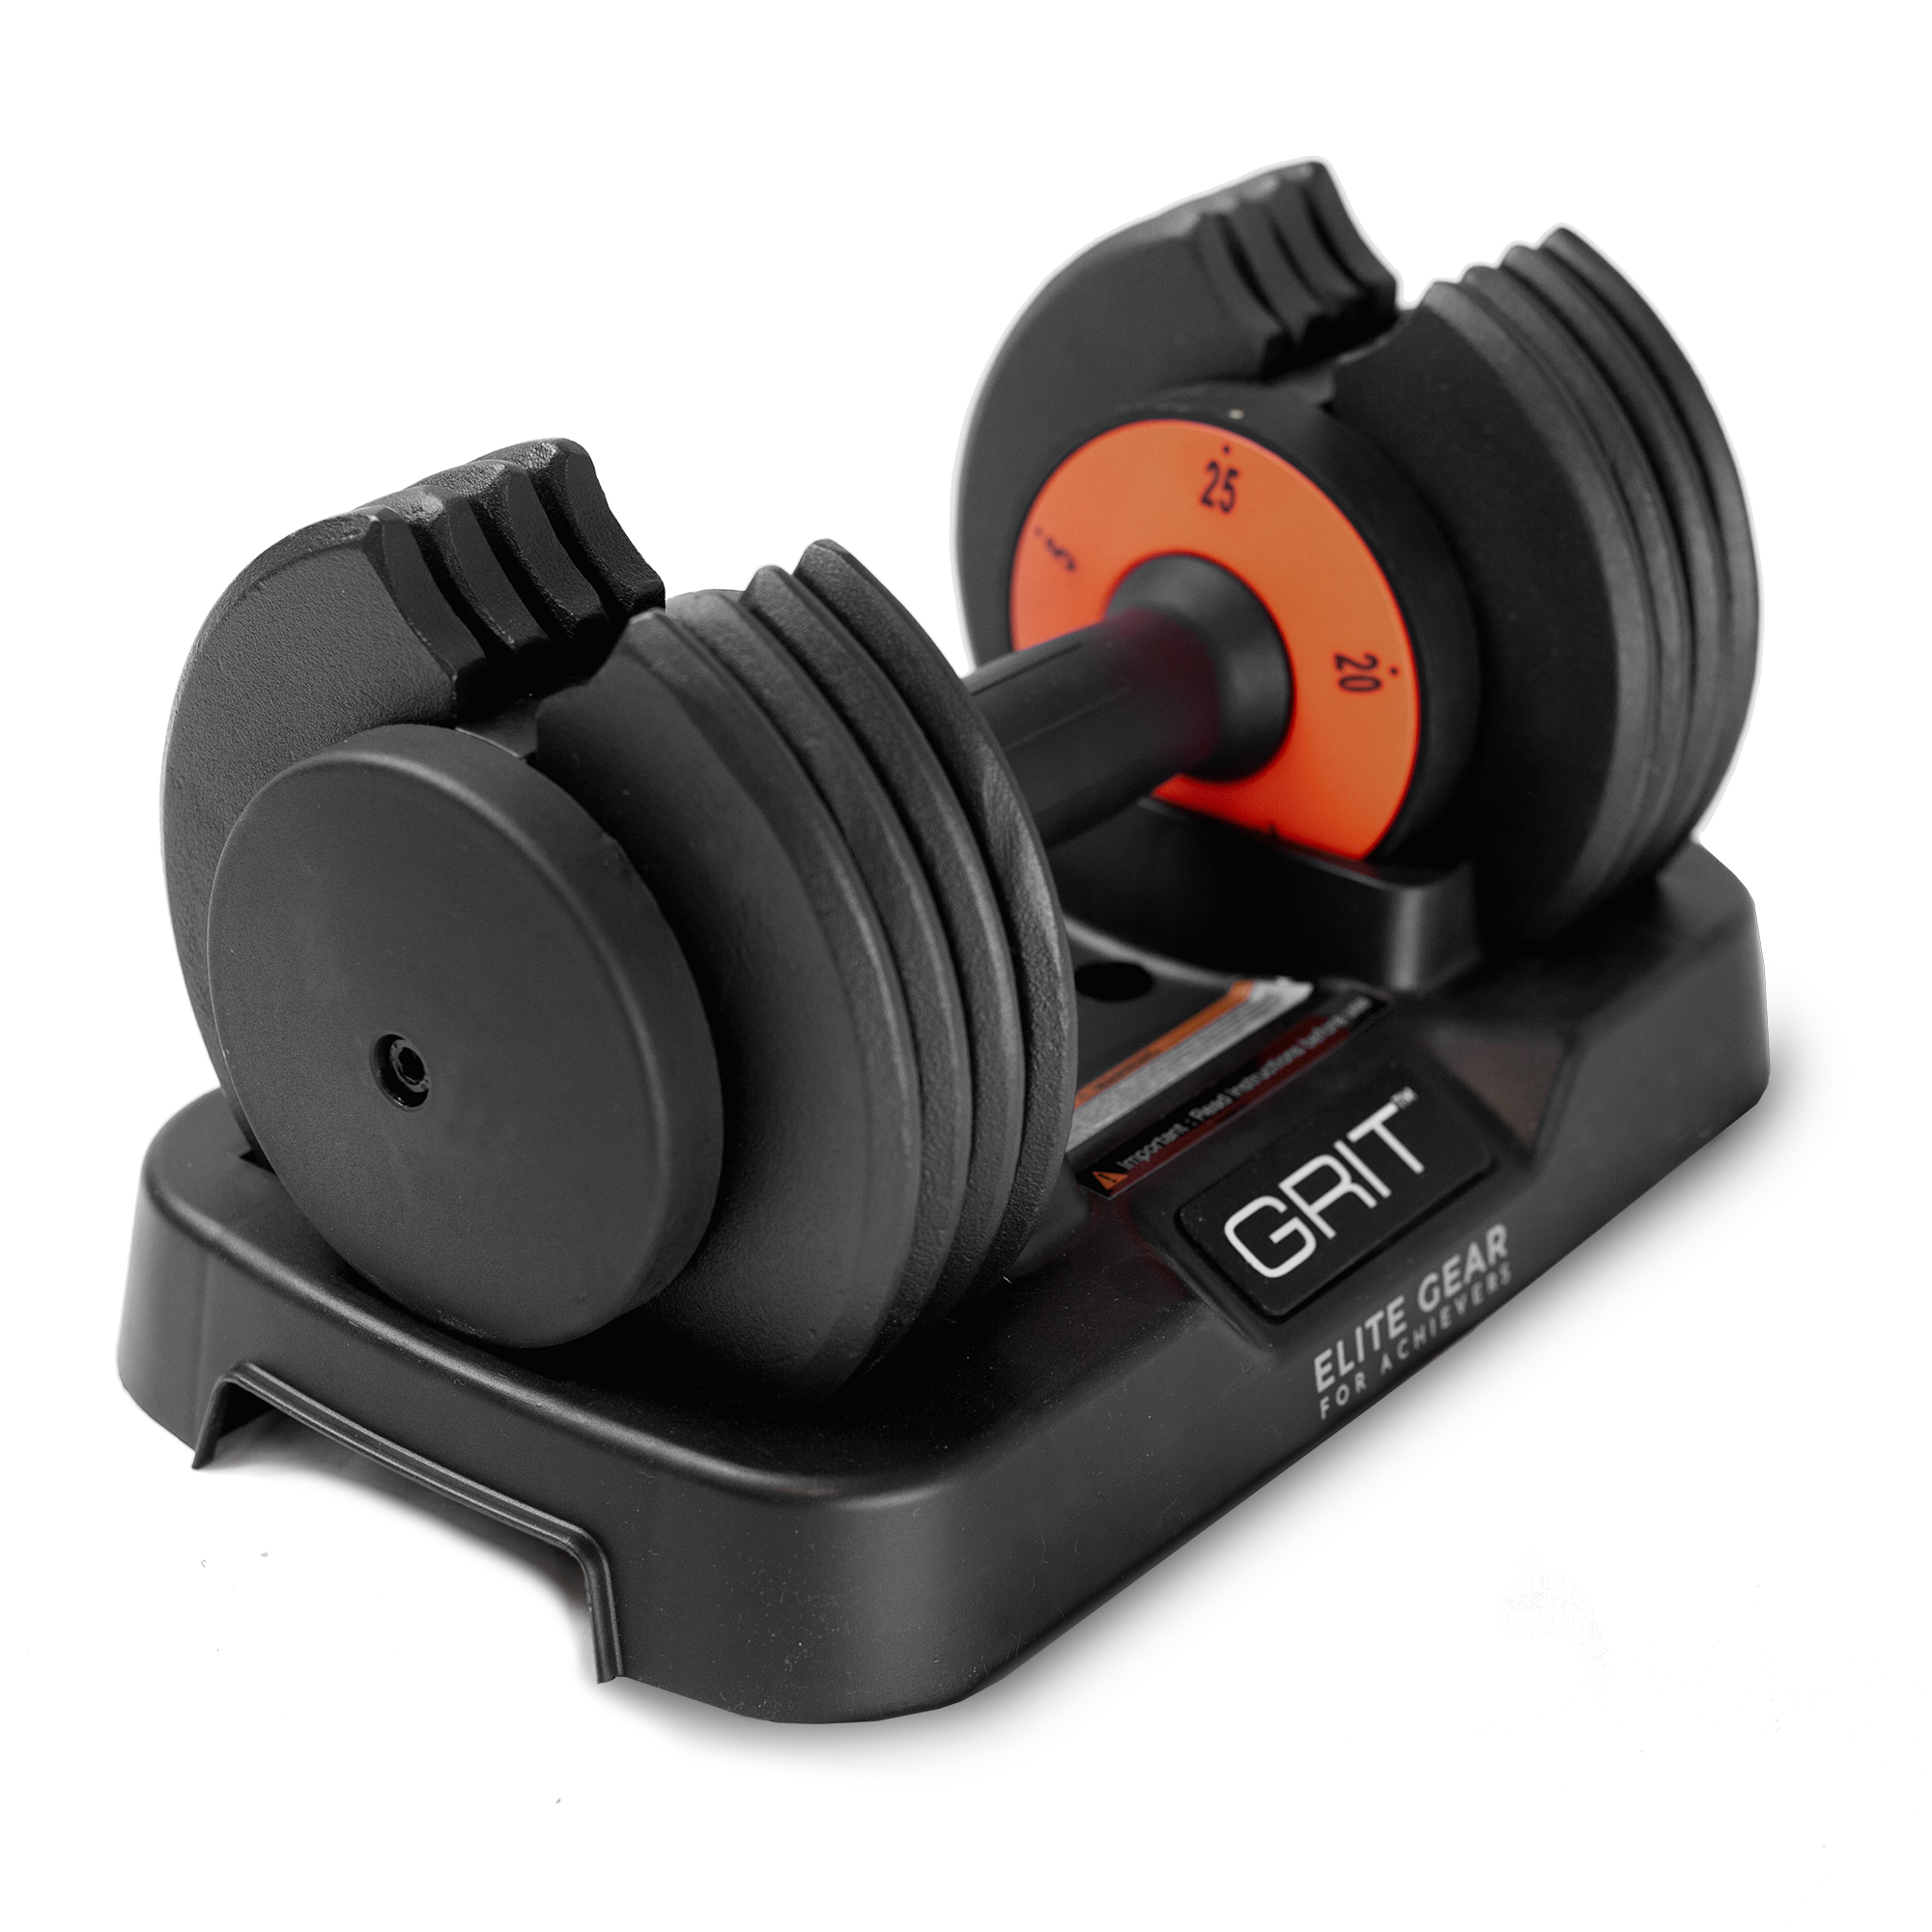 Anti-Slip Grip Handle Details about   GRIT Elite 5-25 LB Adjustable Dumbbells with Weight Trays 